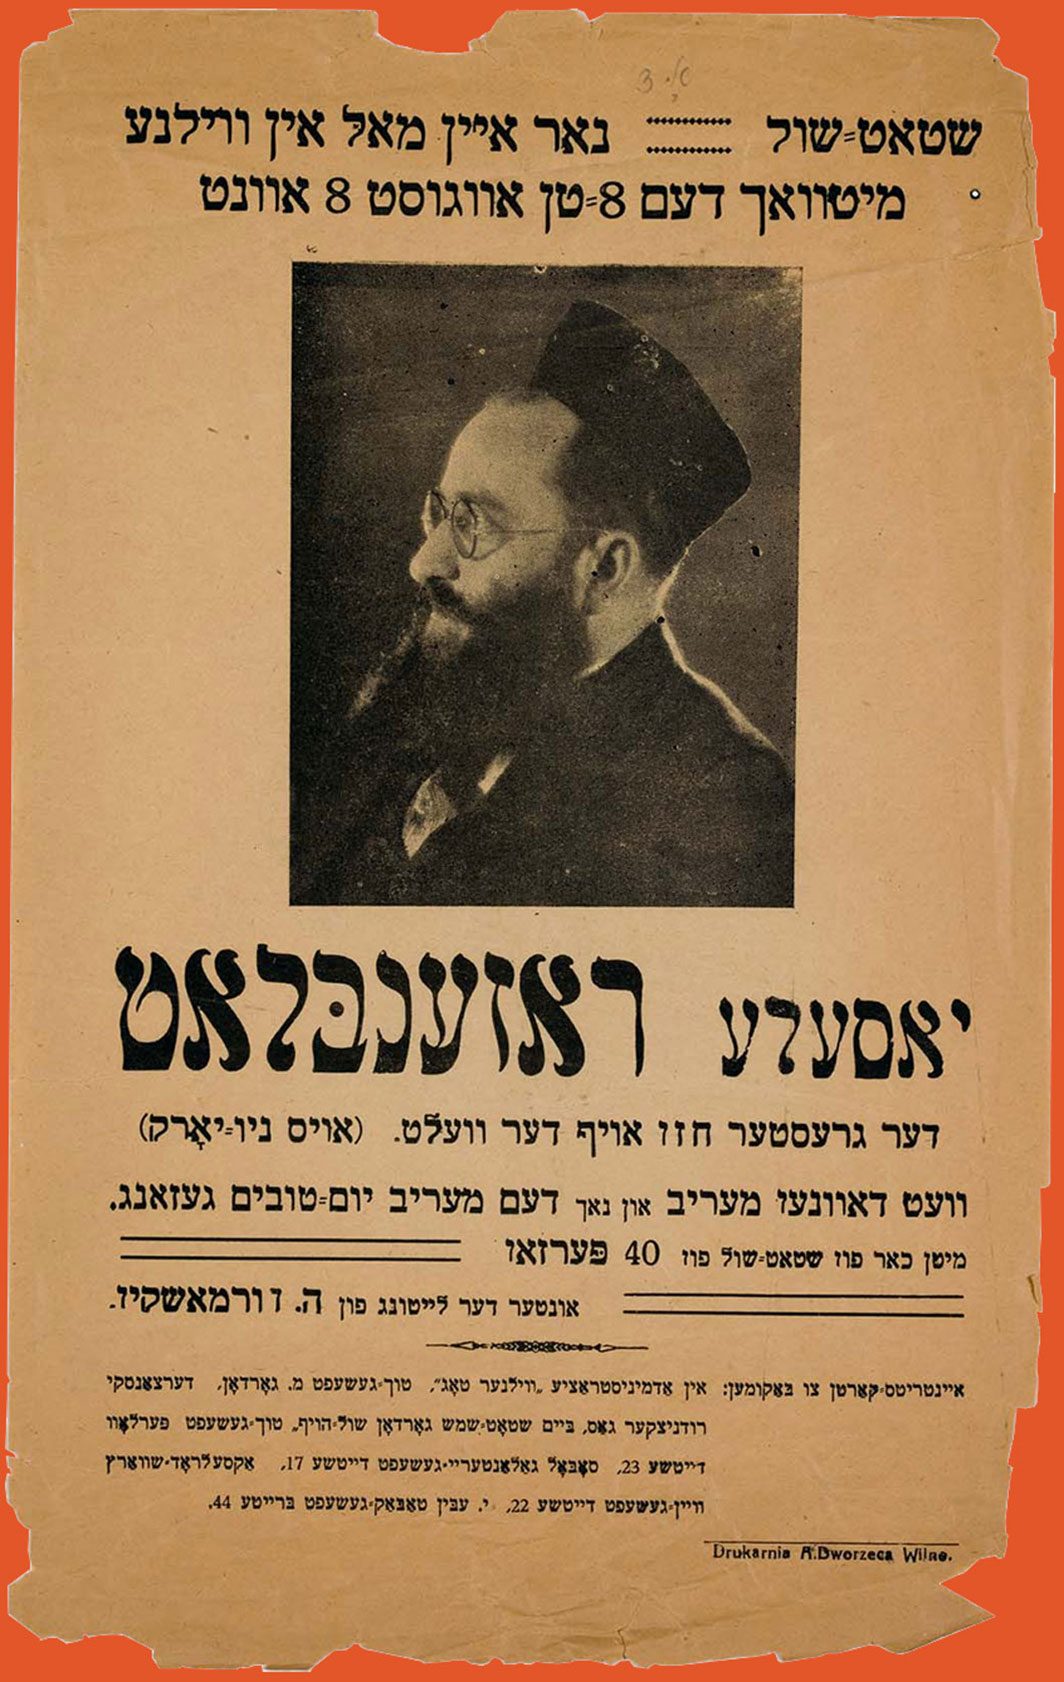 Flier in Yiddish advertising a cantorial performance